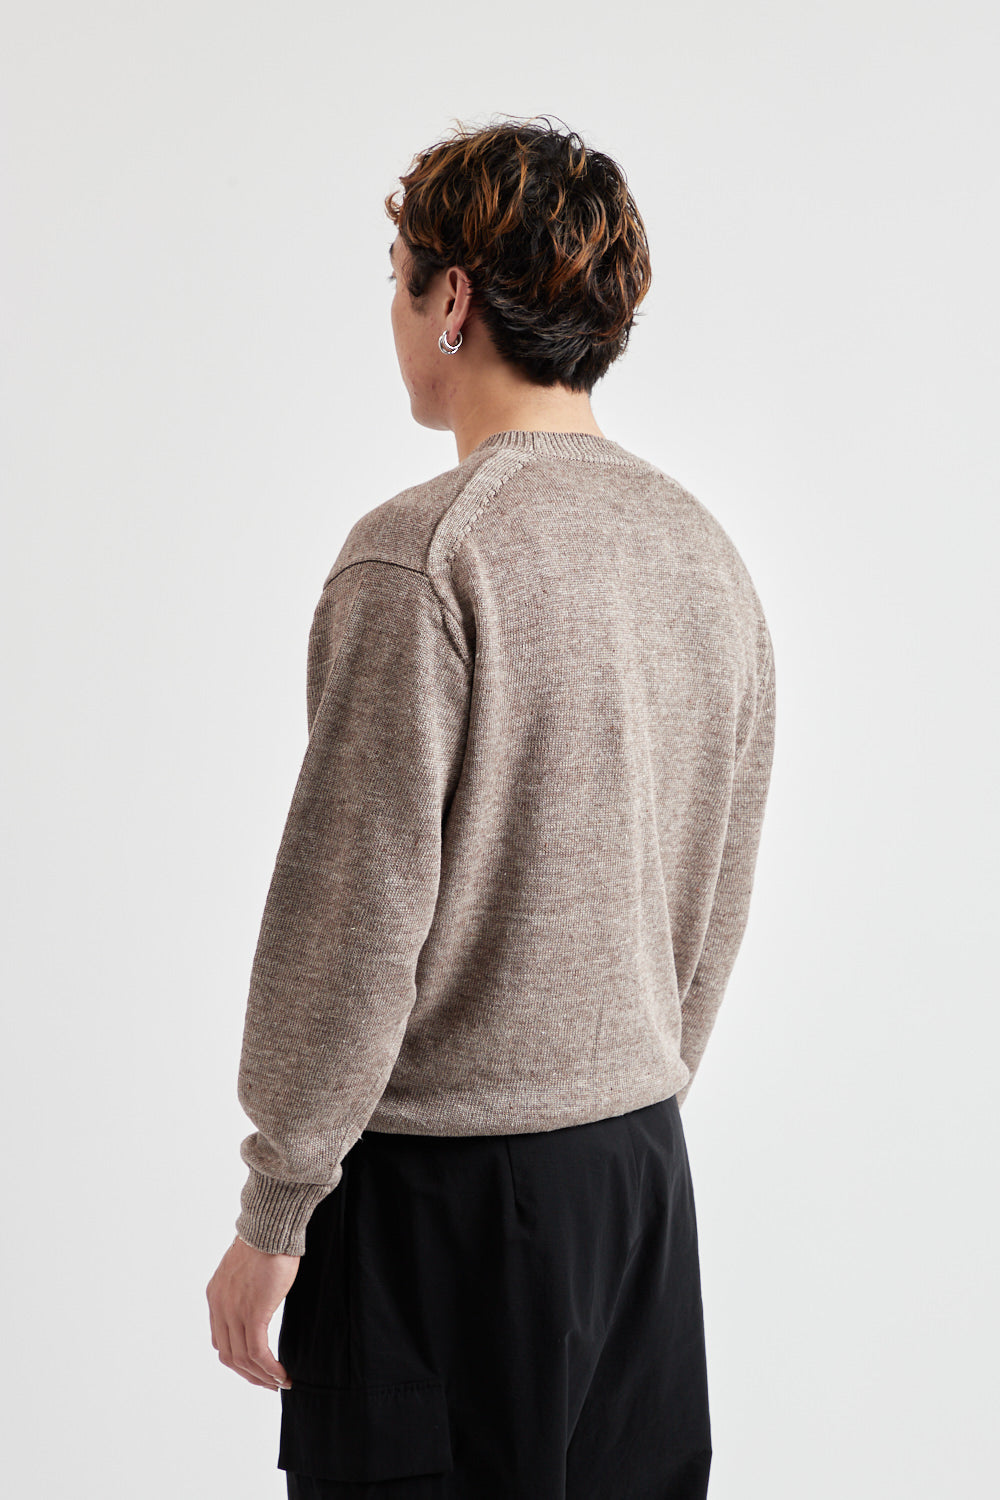 Washed High Count Linen Crew Neck - Brown